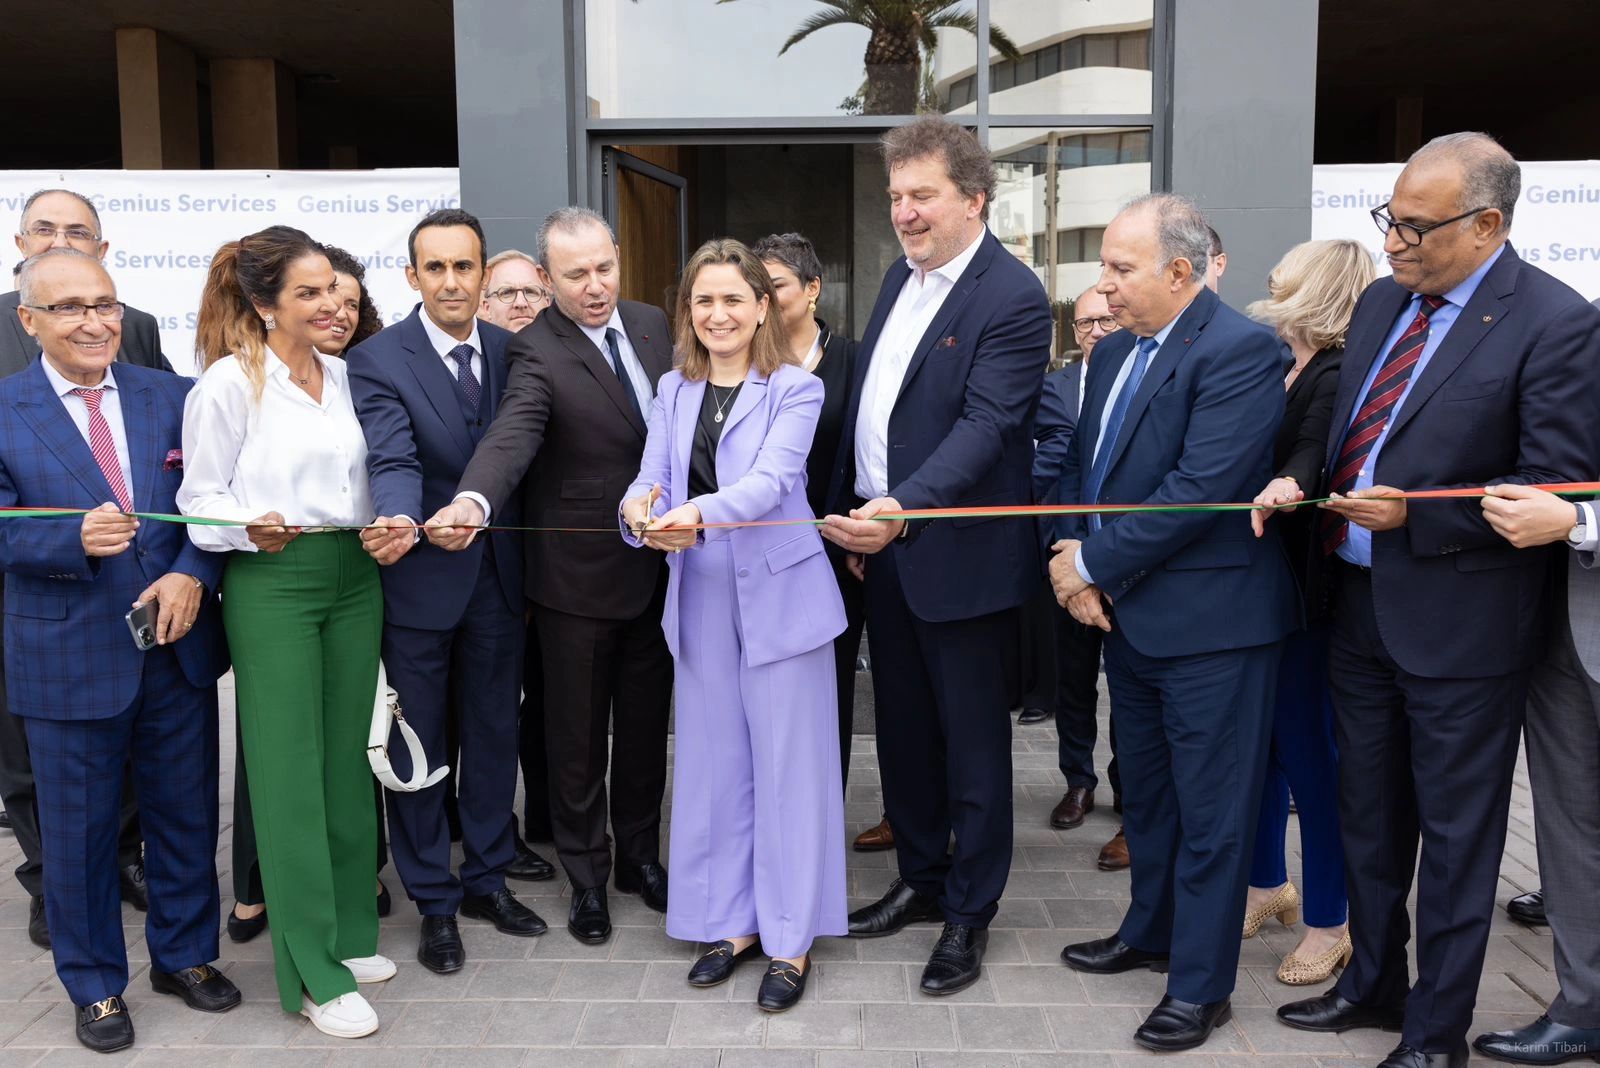 Sogetrel inaugurates “Genius Services”, its new subsidiary in Morocco